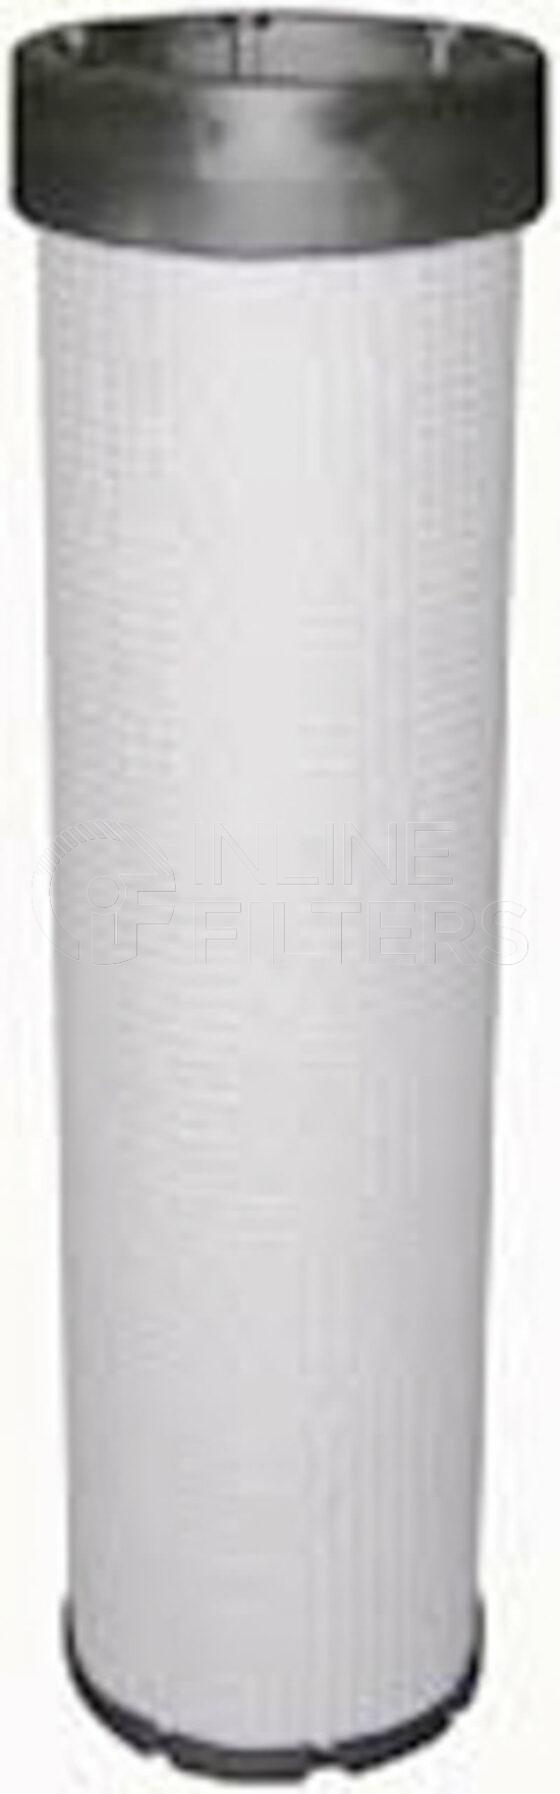 Baldwin RS5304. FILTER-Air(Brand Specific) Product – Brand Specific Baldwin – Cartridge Inner Product Filter